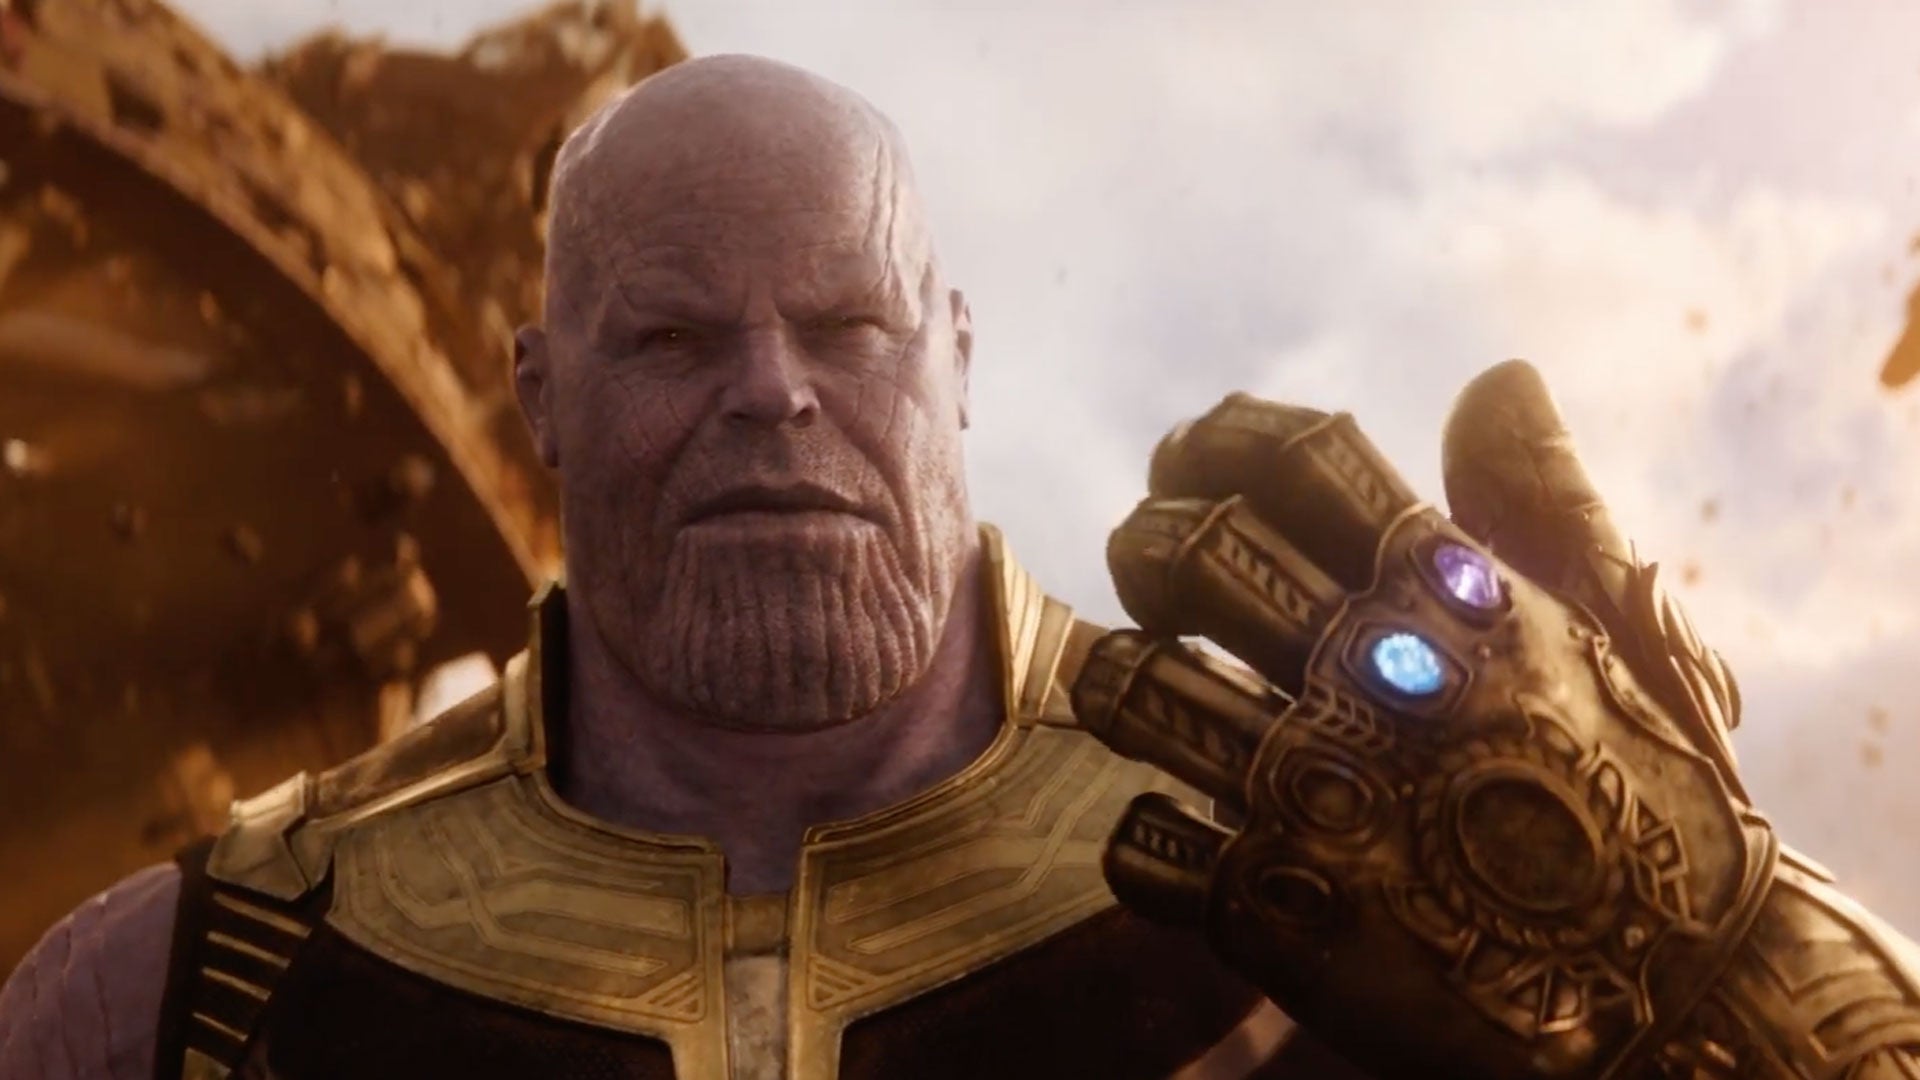 /blogs/news/like-thanos-inflation-is-inevitable-an-update-on-pricing